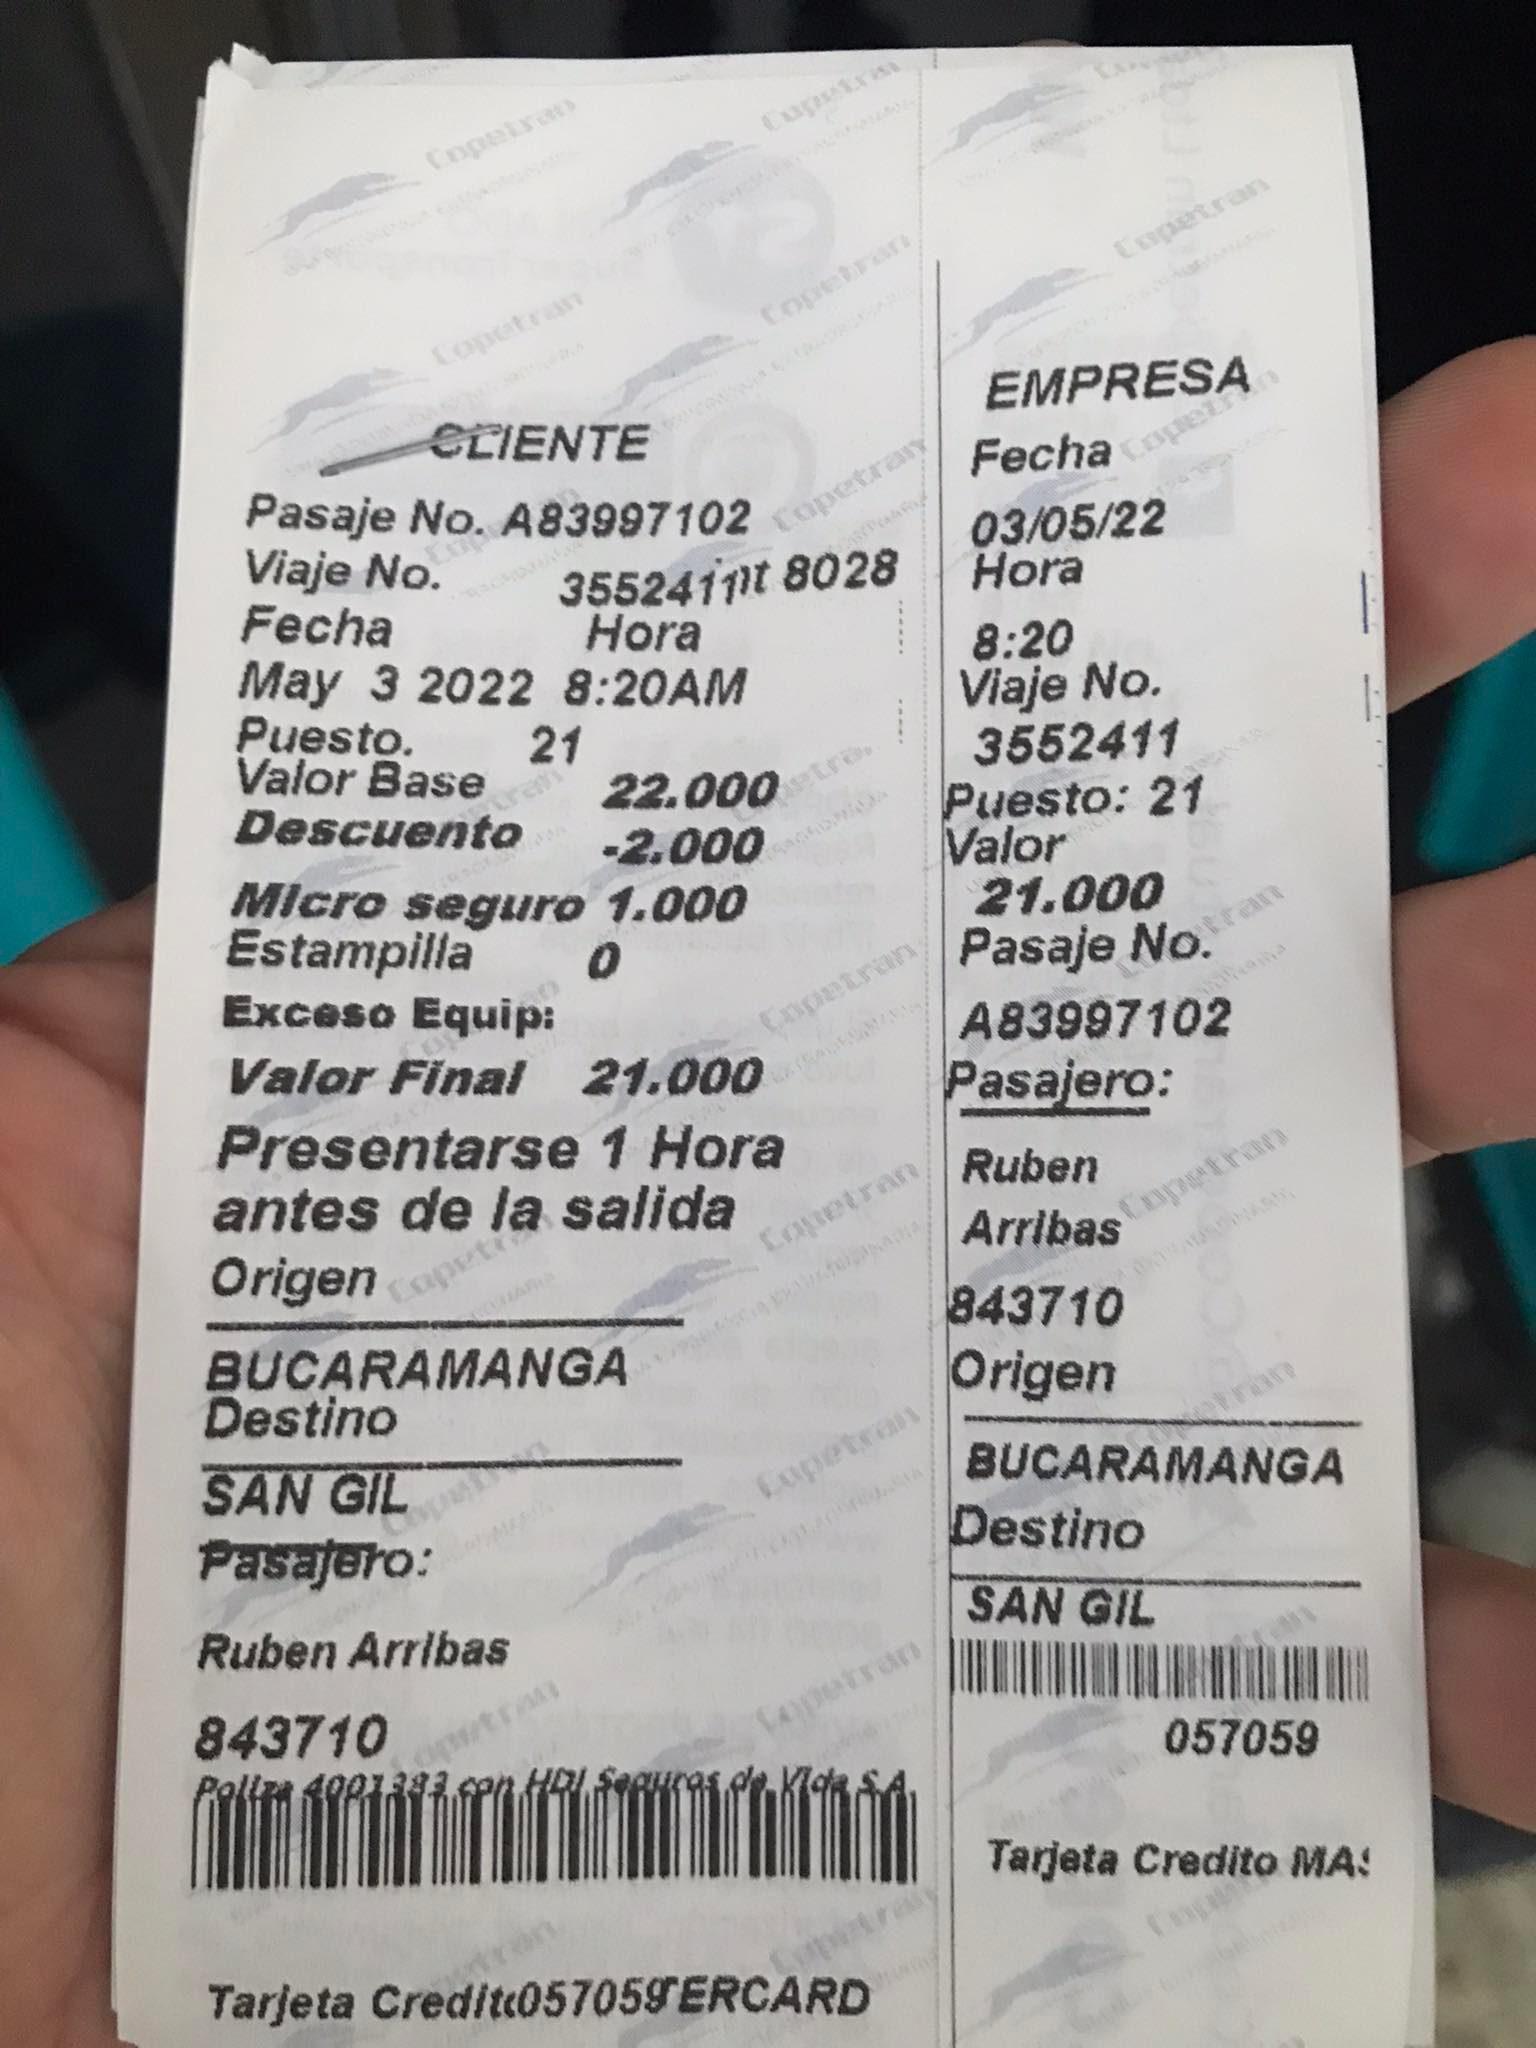 How To Get From Bucaramanga to San Gil - All Possible Ways, cheapest way from Bucaramanga to San Gil, cheapest way from Bucaramanga to San Gil, Bucaramanga to San Gil, bus Bucaramanga to San Gil, San Gil where to stay, Copetran bus Bucaramanga to San Gil, bus schedule copetran Bucarmanga to san gil